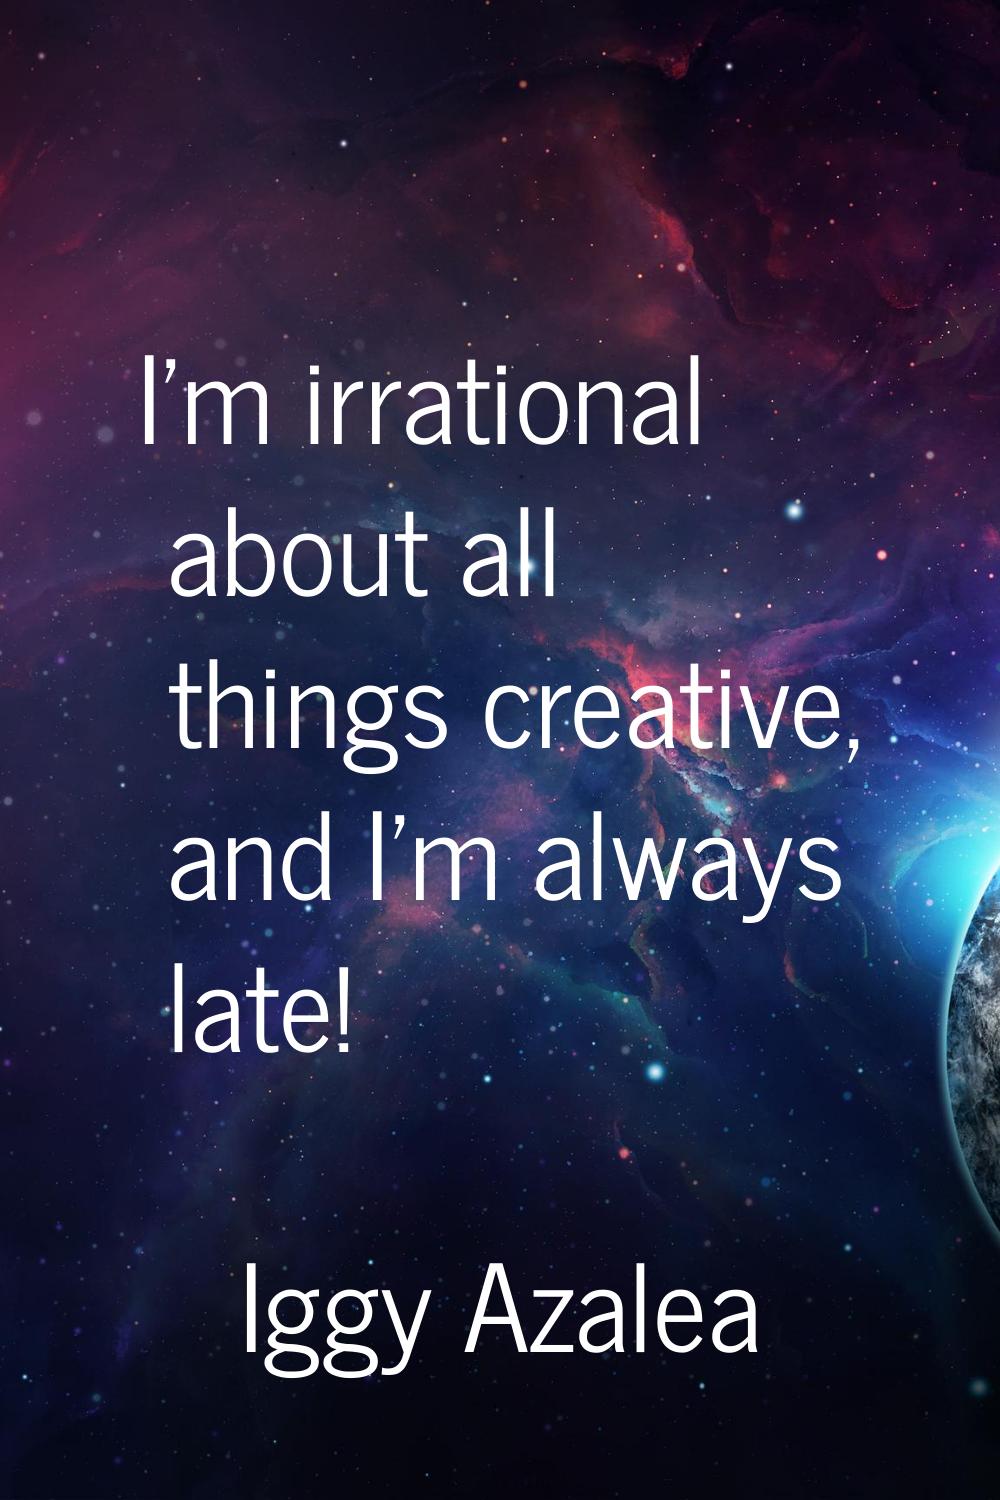 I'm irrational about all things creative, and I'm always late!